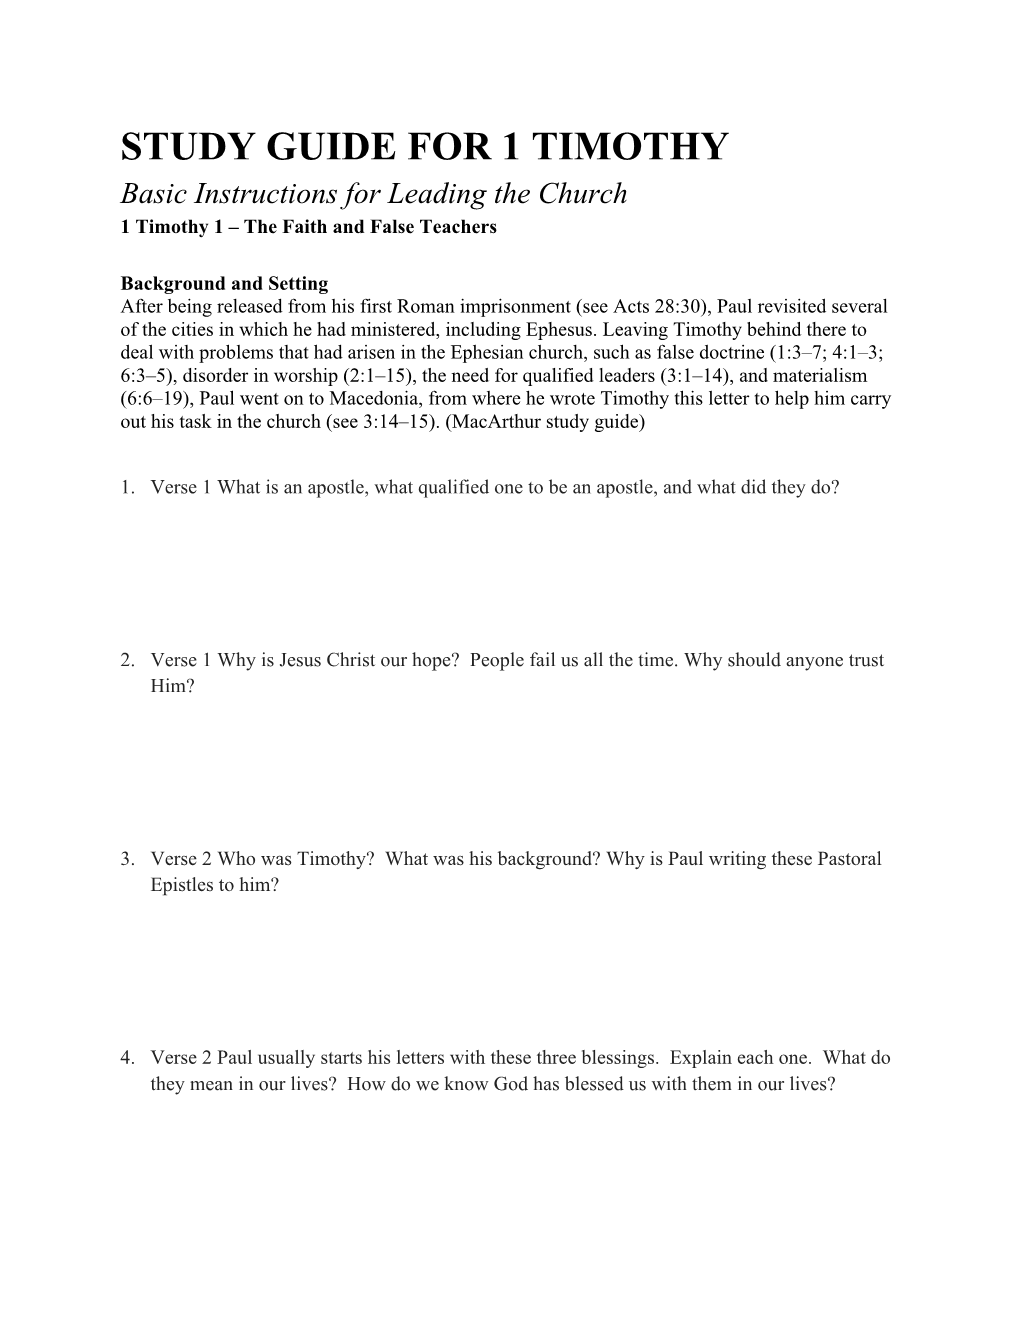 STUDY GUIDE for 1 TIMOTHY Basic Instructions for Leading the Church 1 Timothy 1 – the Faith and False Teachers